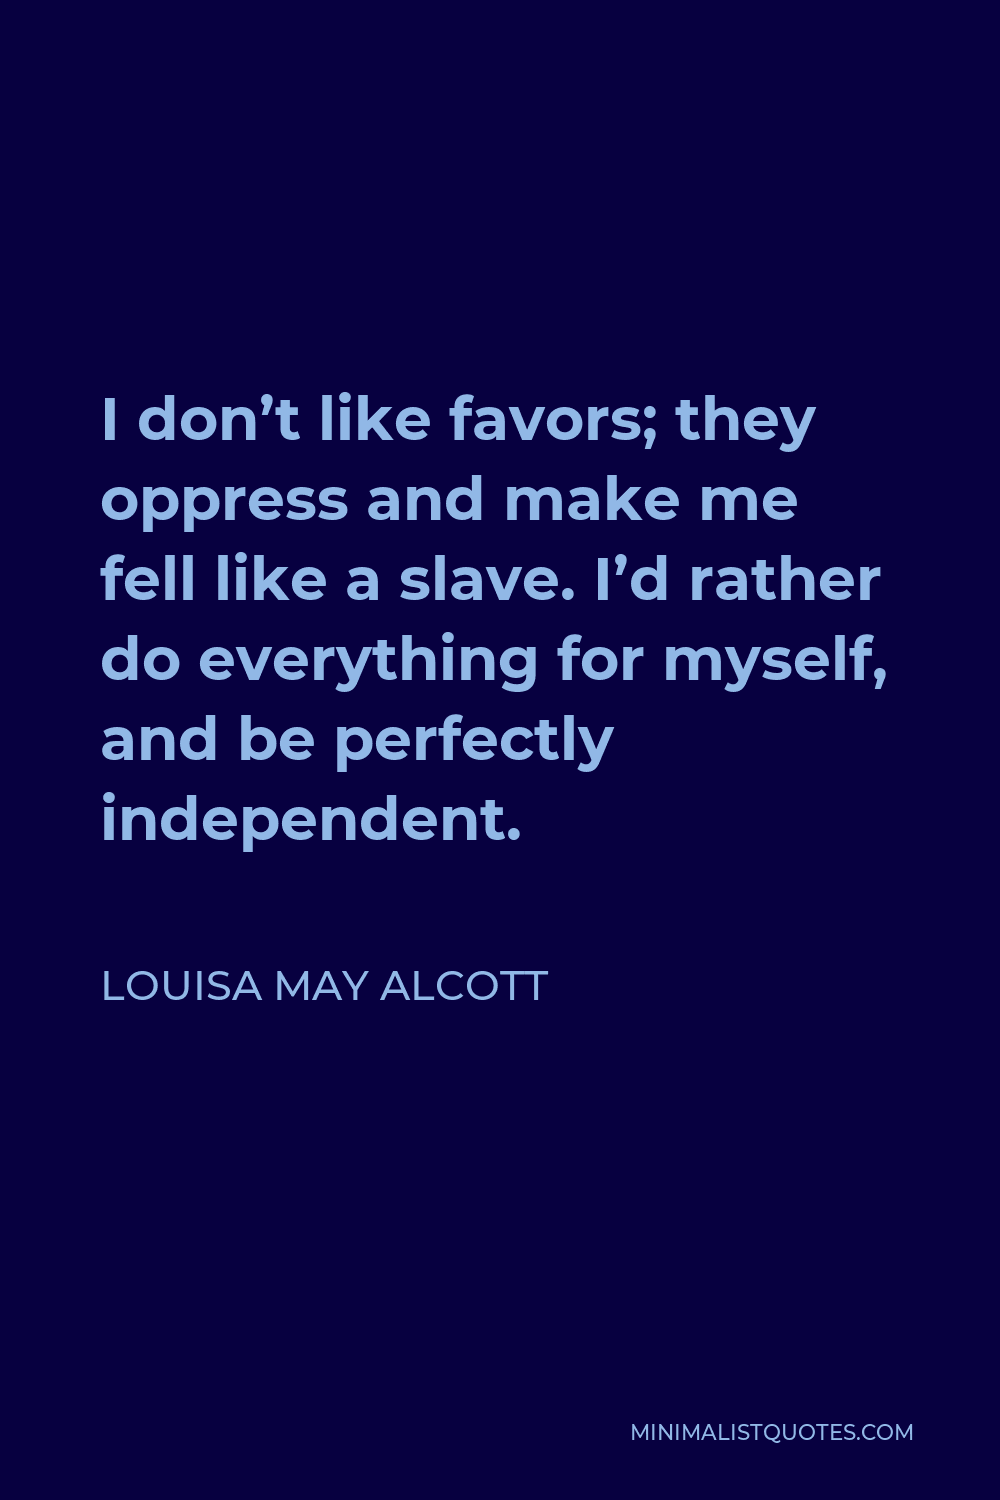 Louisa May Alcott Quote - I don’t like favors; they oppress and make me fell like a slave. I’d rather do everything for myself, and be perfectly independent.